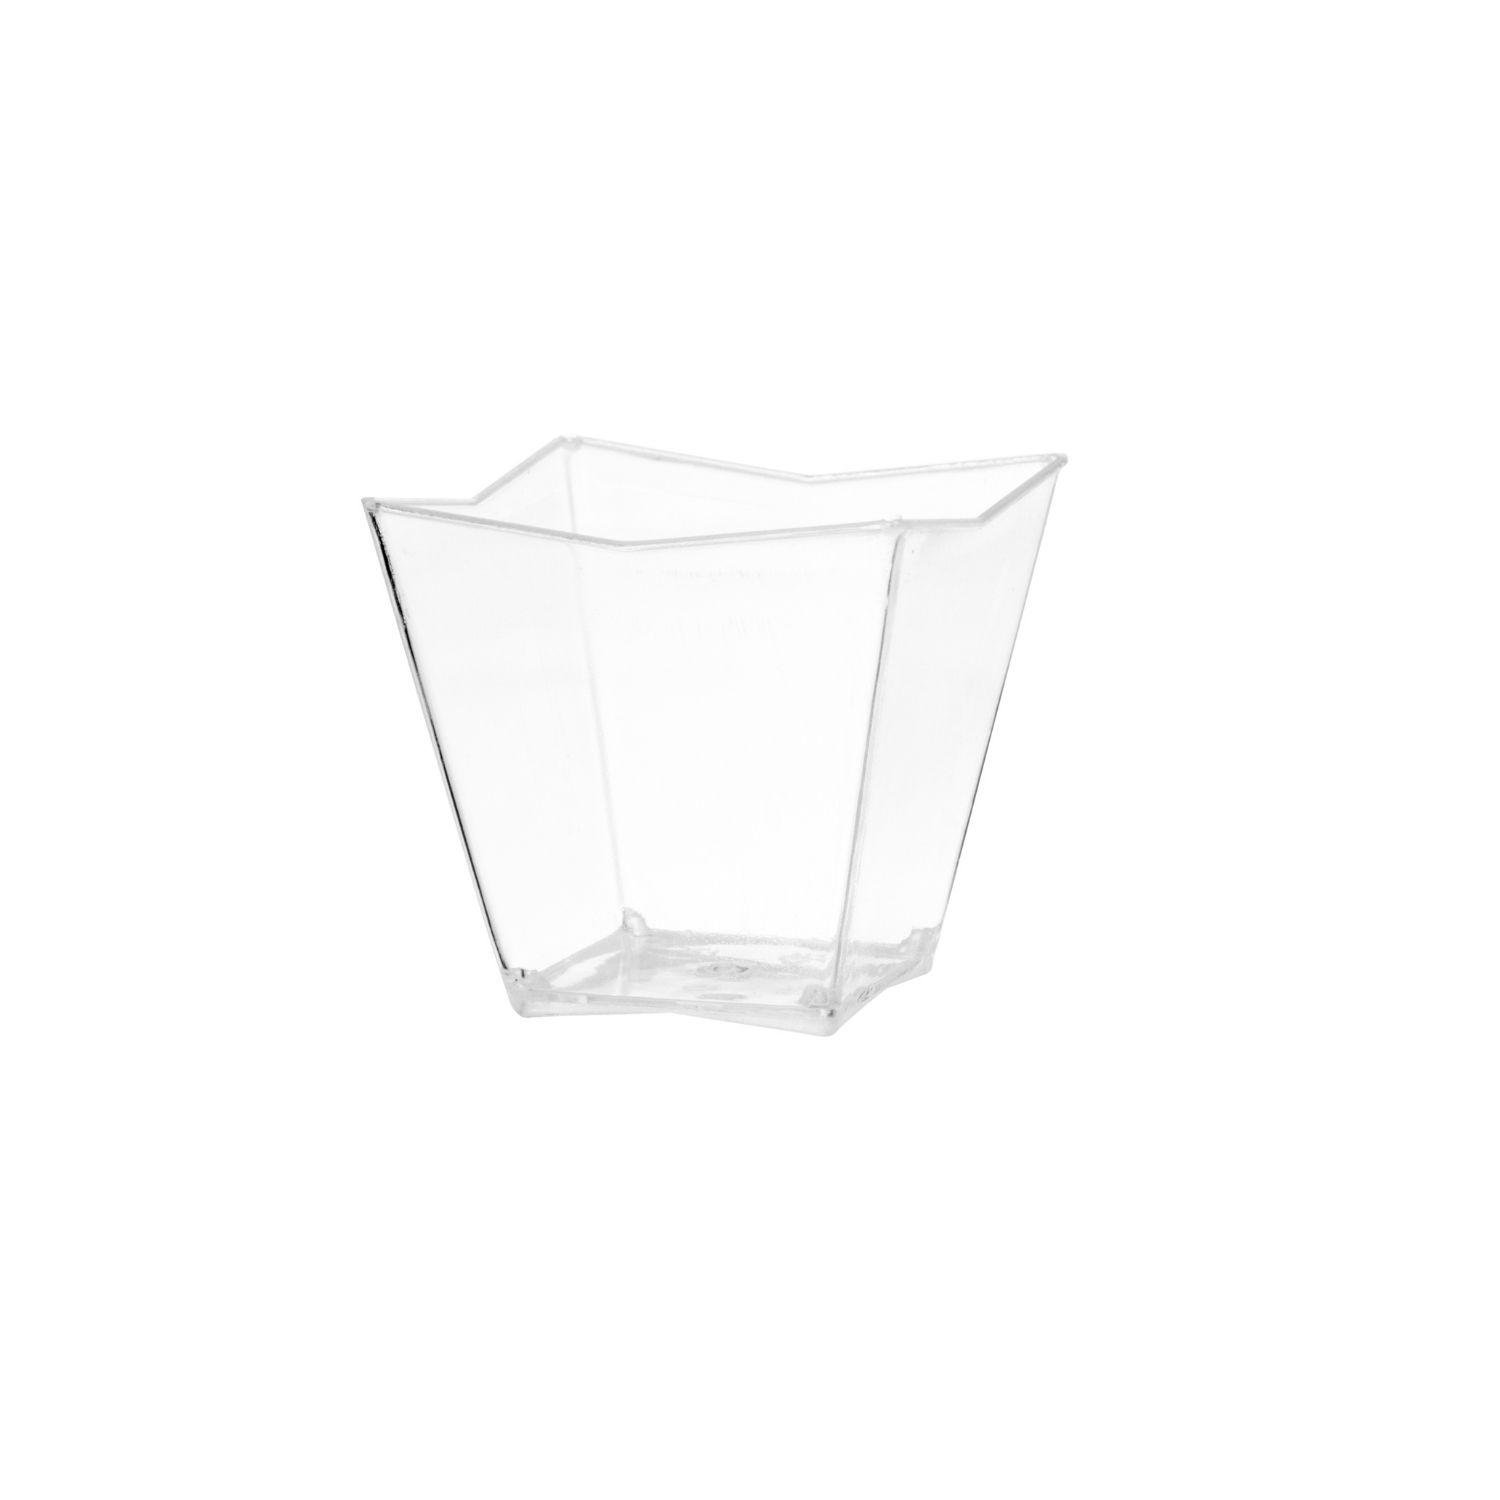 2 Oz. Clear Square Miniatures - 24 Ct.